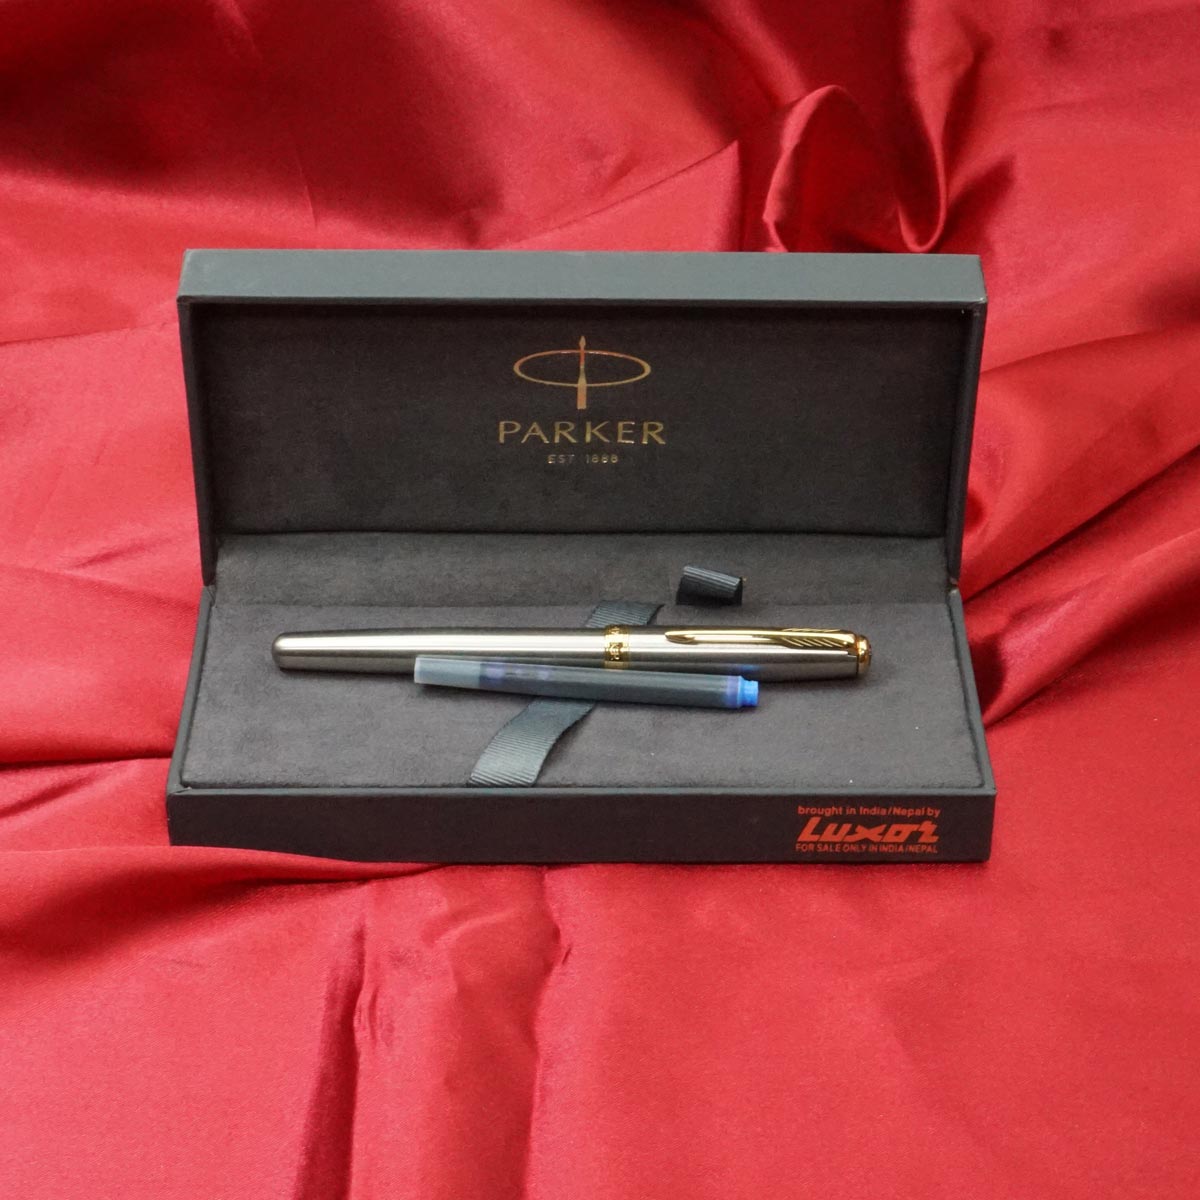 Parker Sonnet Stainless Steel Body With Medium Nib Catridge And Converter Type Fountain Pen SKU 21054